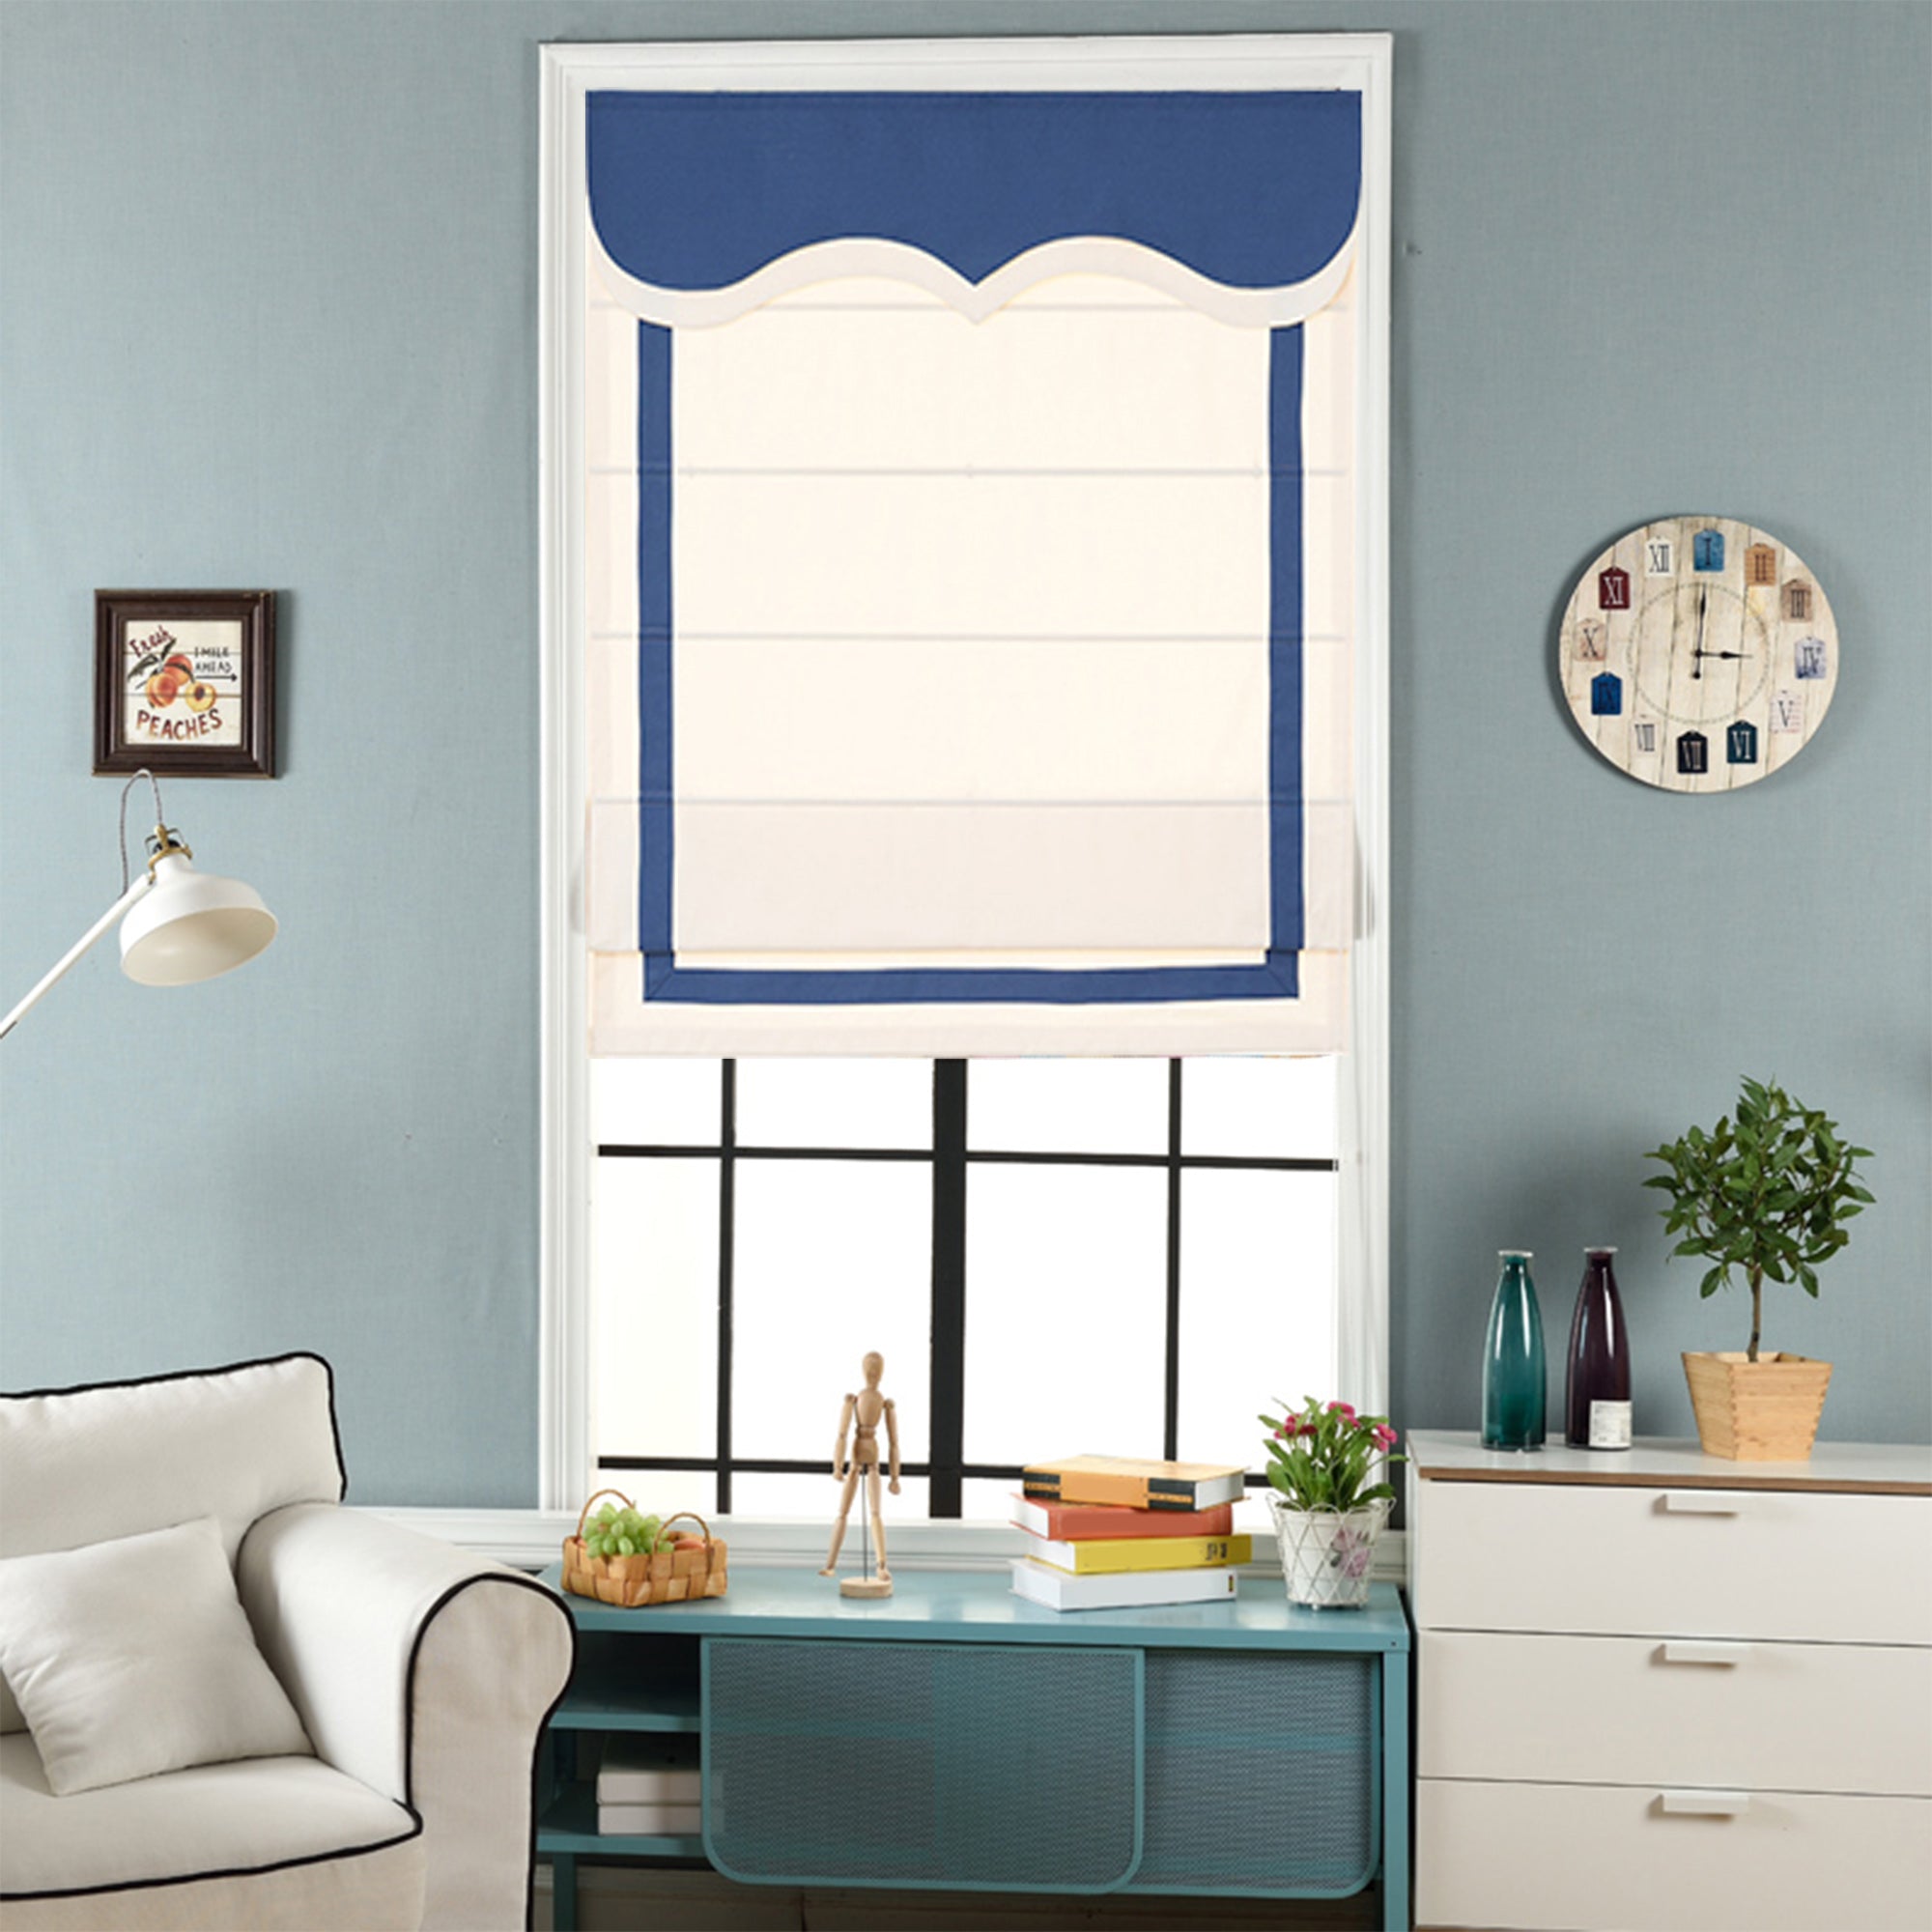 Quick Fix Washable Roman Window Shades Flat Fold with Valance, SG-009 White with Blue Trim